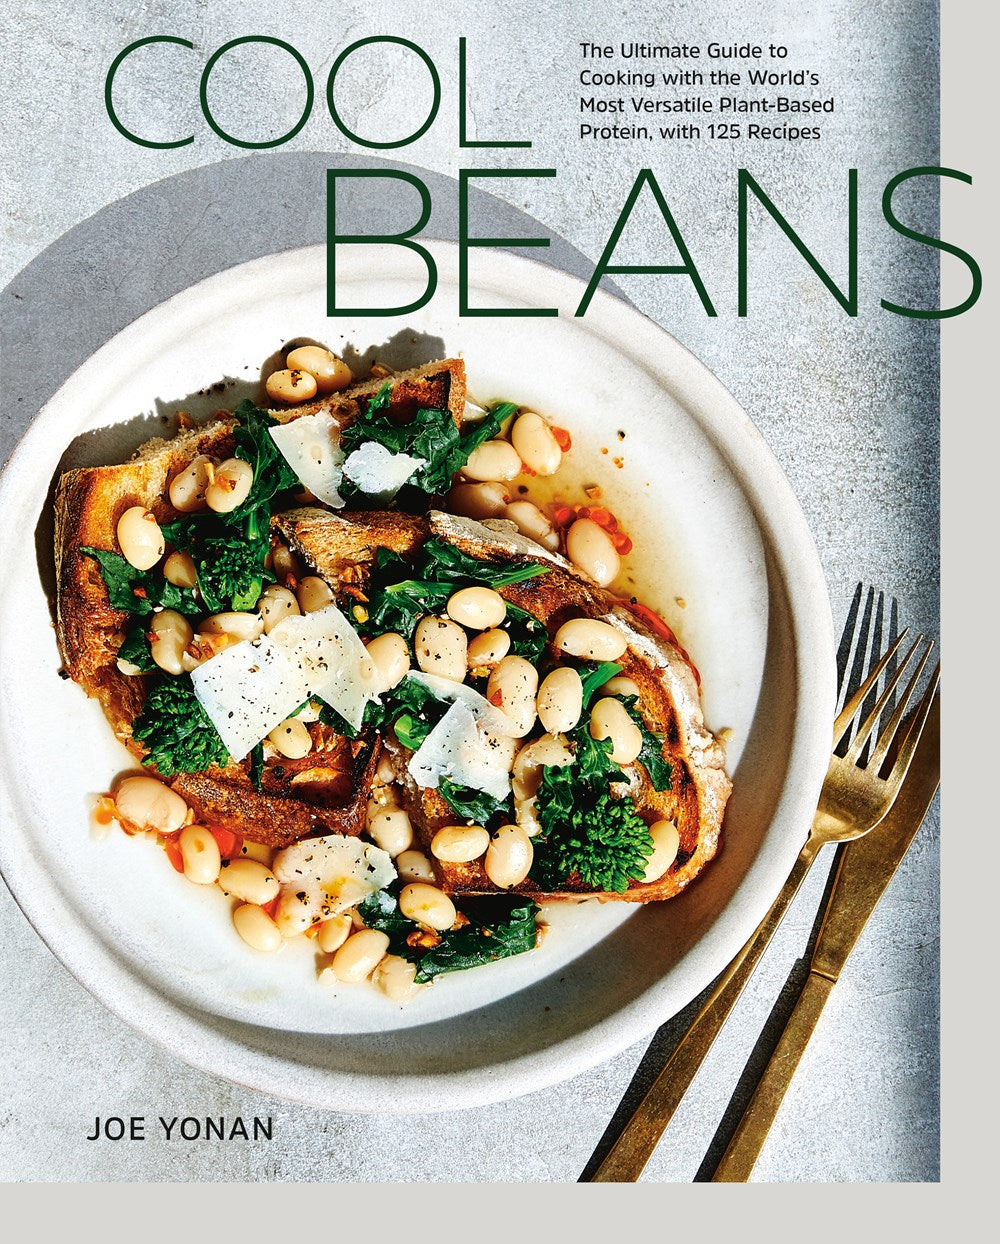 Cool Beans : The Ultimate Guide to Cooking with the World's Most Versatile Plant-Based Protein